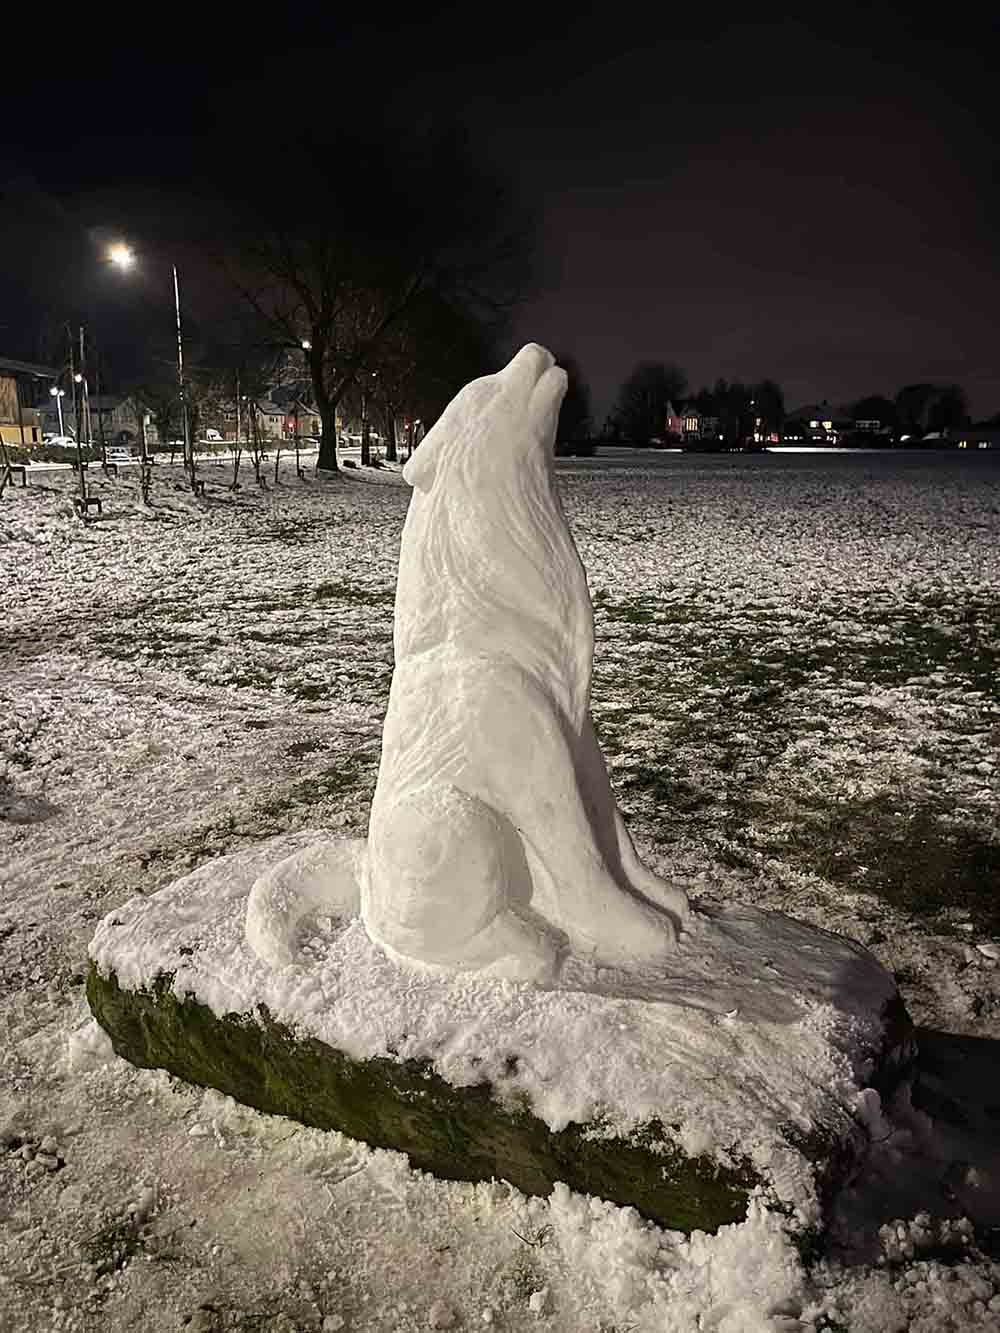 Amazing snow sculpture shows wolf howling at the moon - Viral News